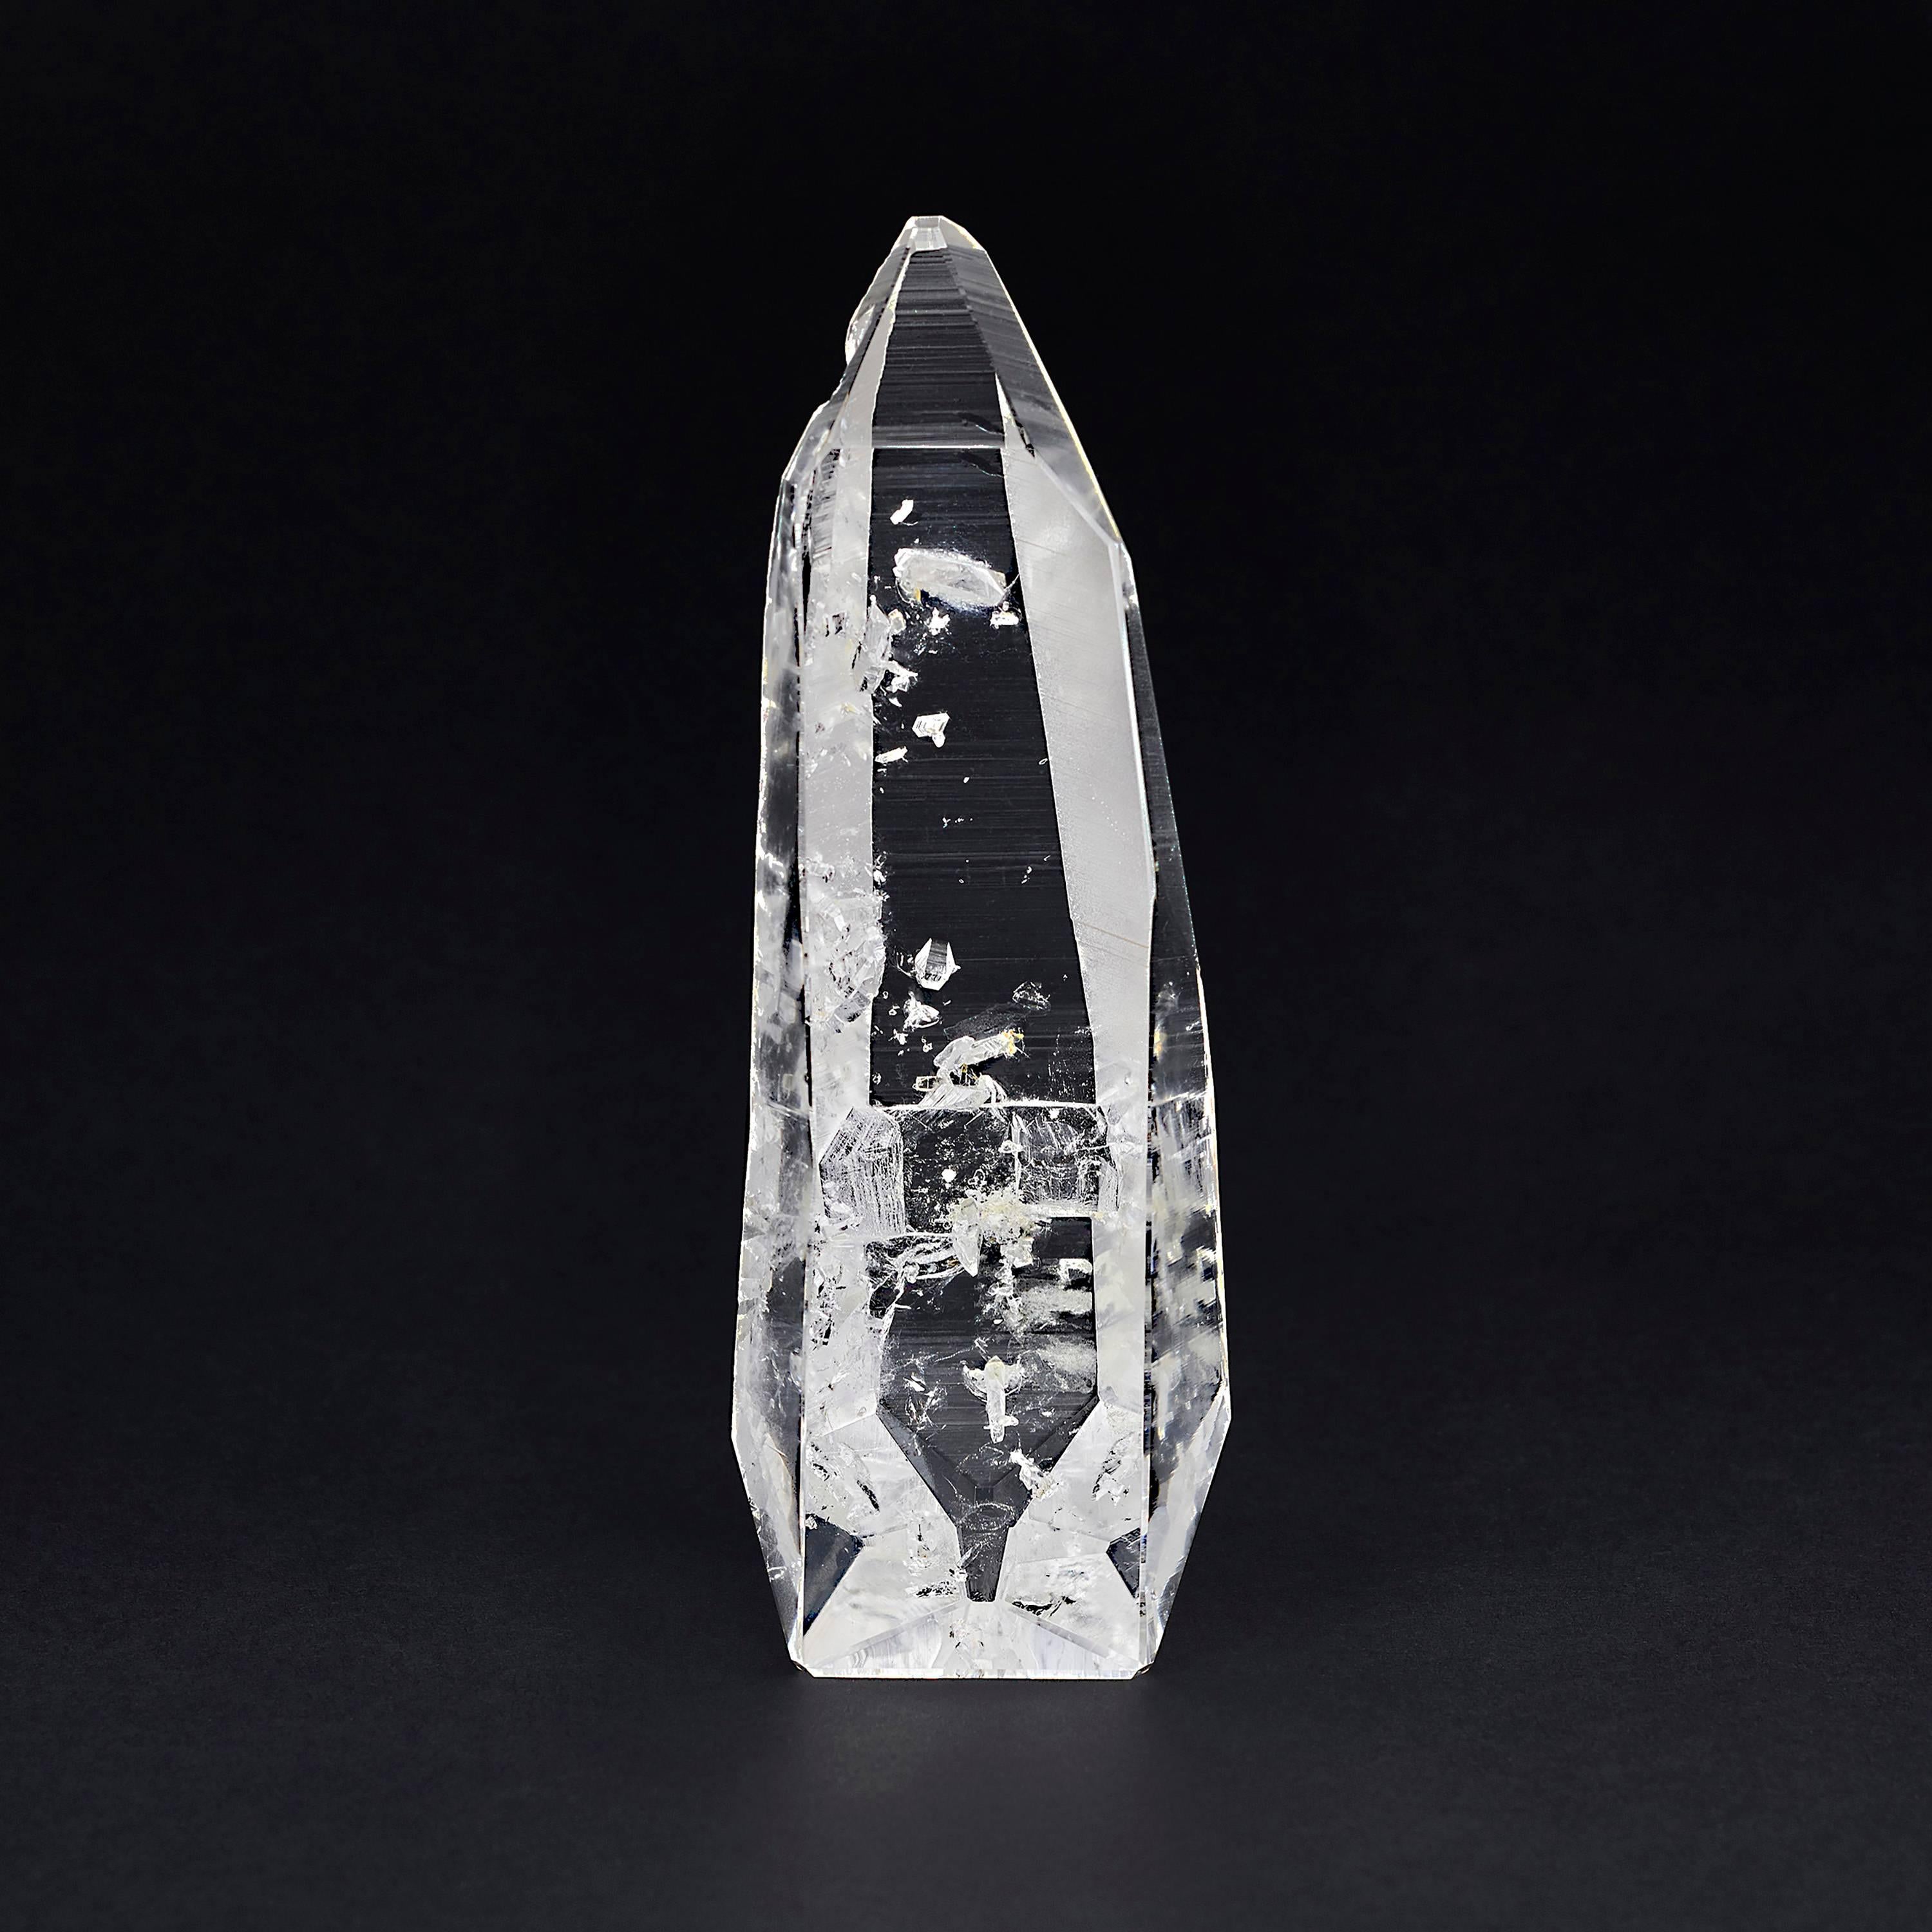 One of a kind rockcrystal sculpture.
The natural crystallization is partly untouched, highlighting the natural inclusions of this earth treasure.
Nature has formed this wonderful sculpture, with some fantastic negative crystals & inclusions, that